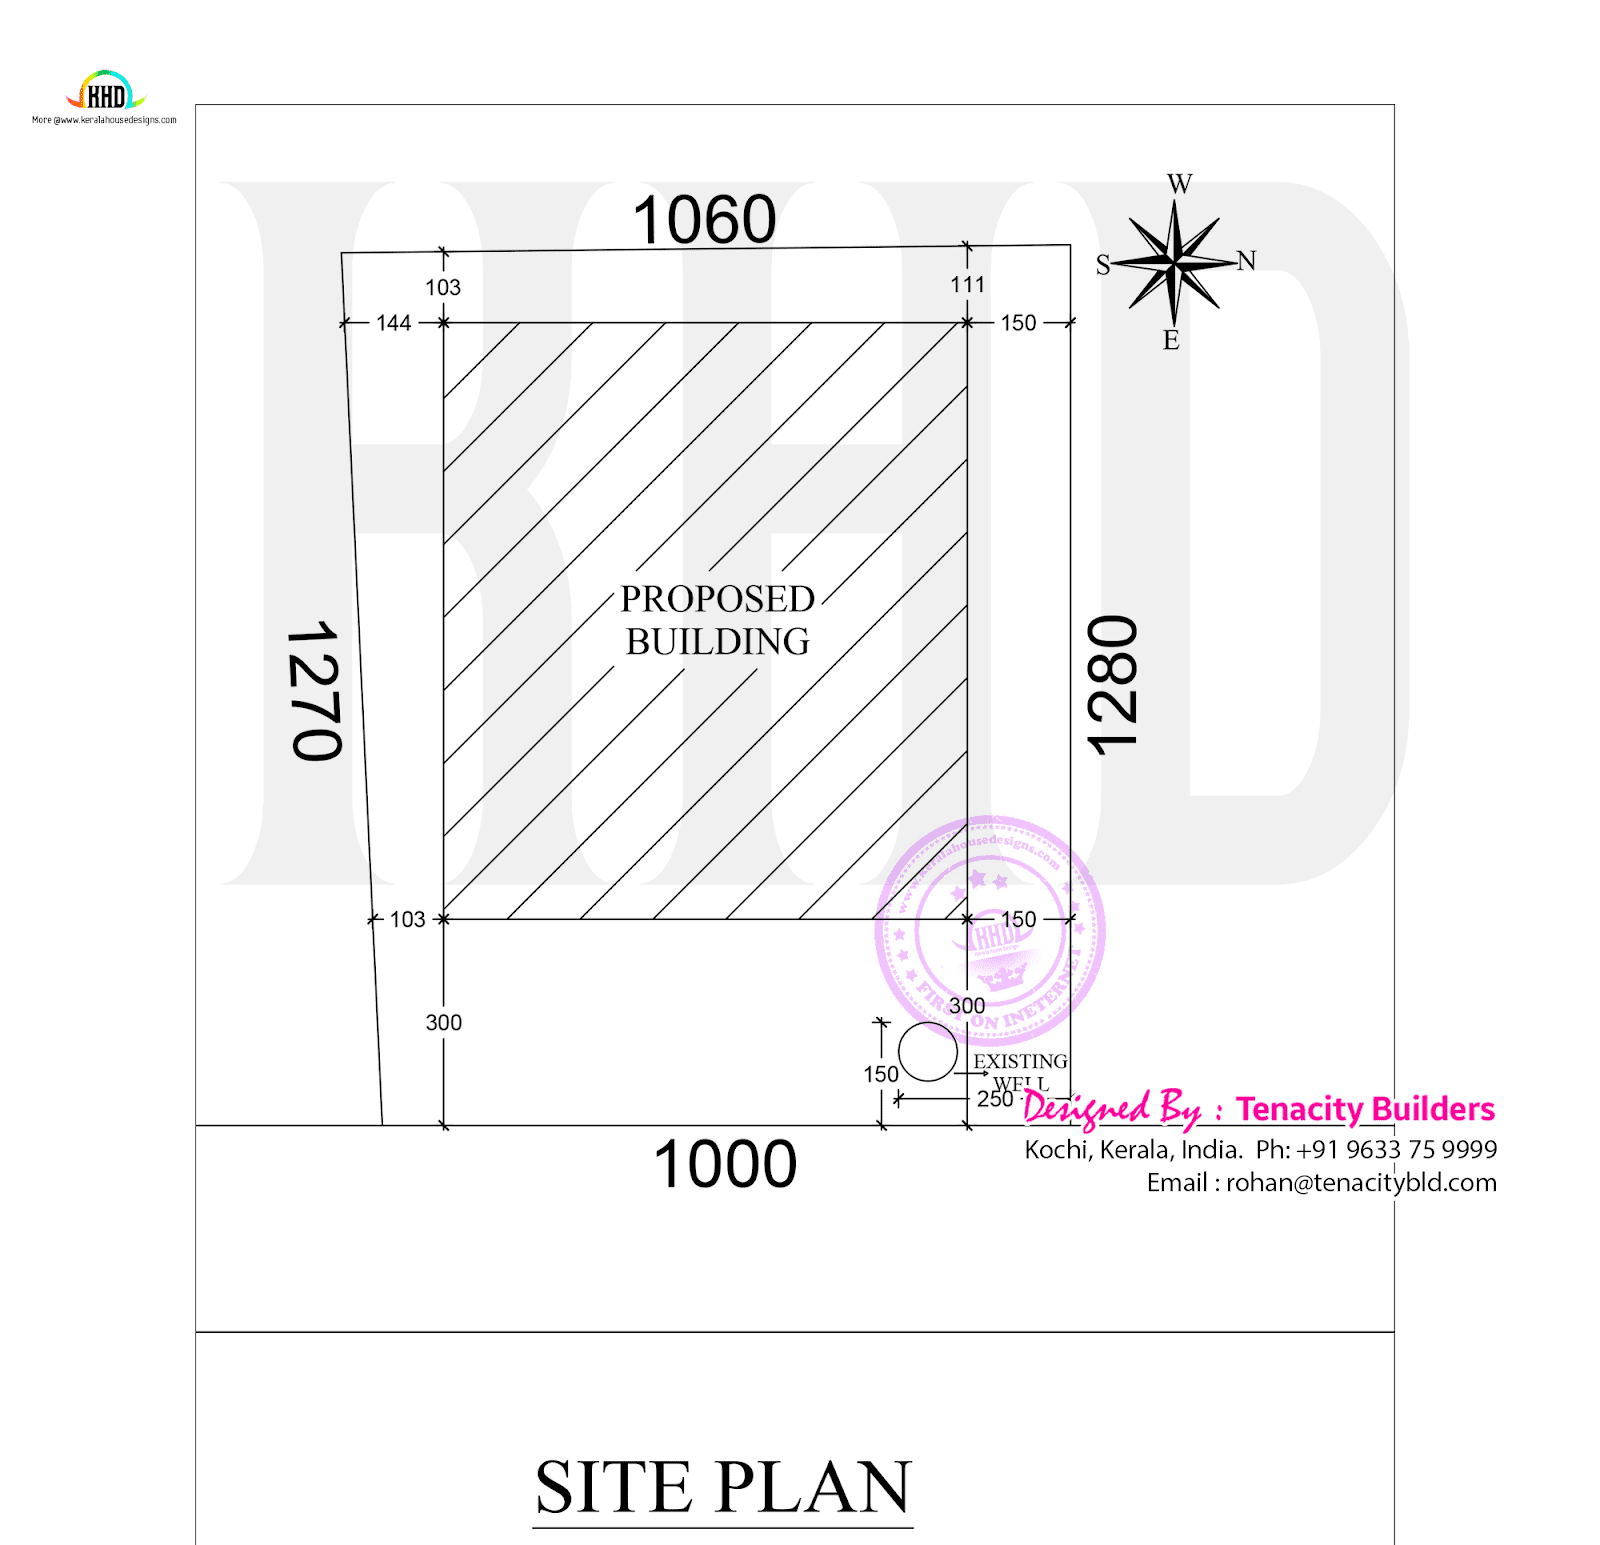 Site or land plan drawing of the tiny double-story house, showing the layout of the house on the property.